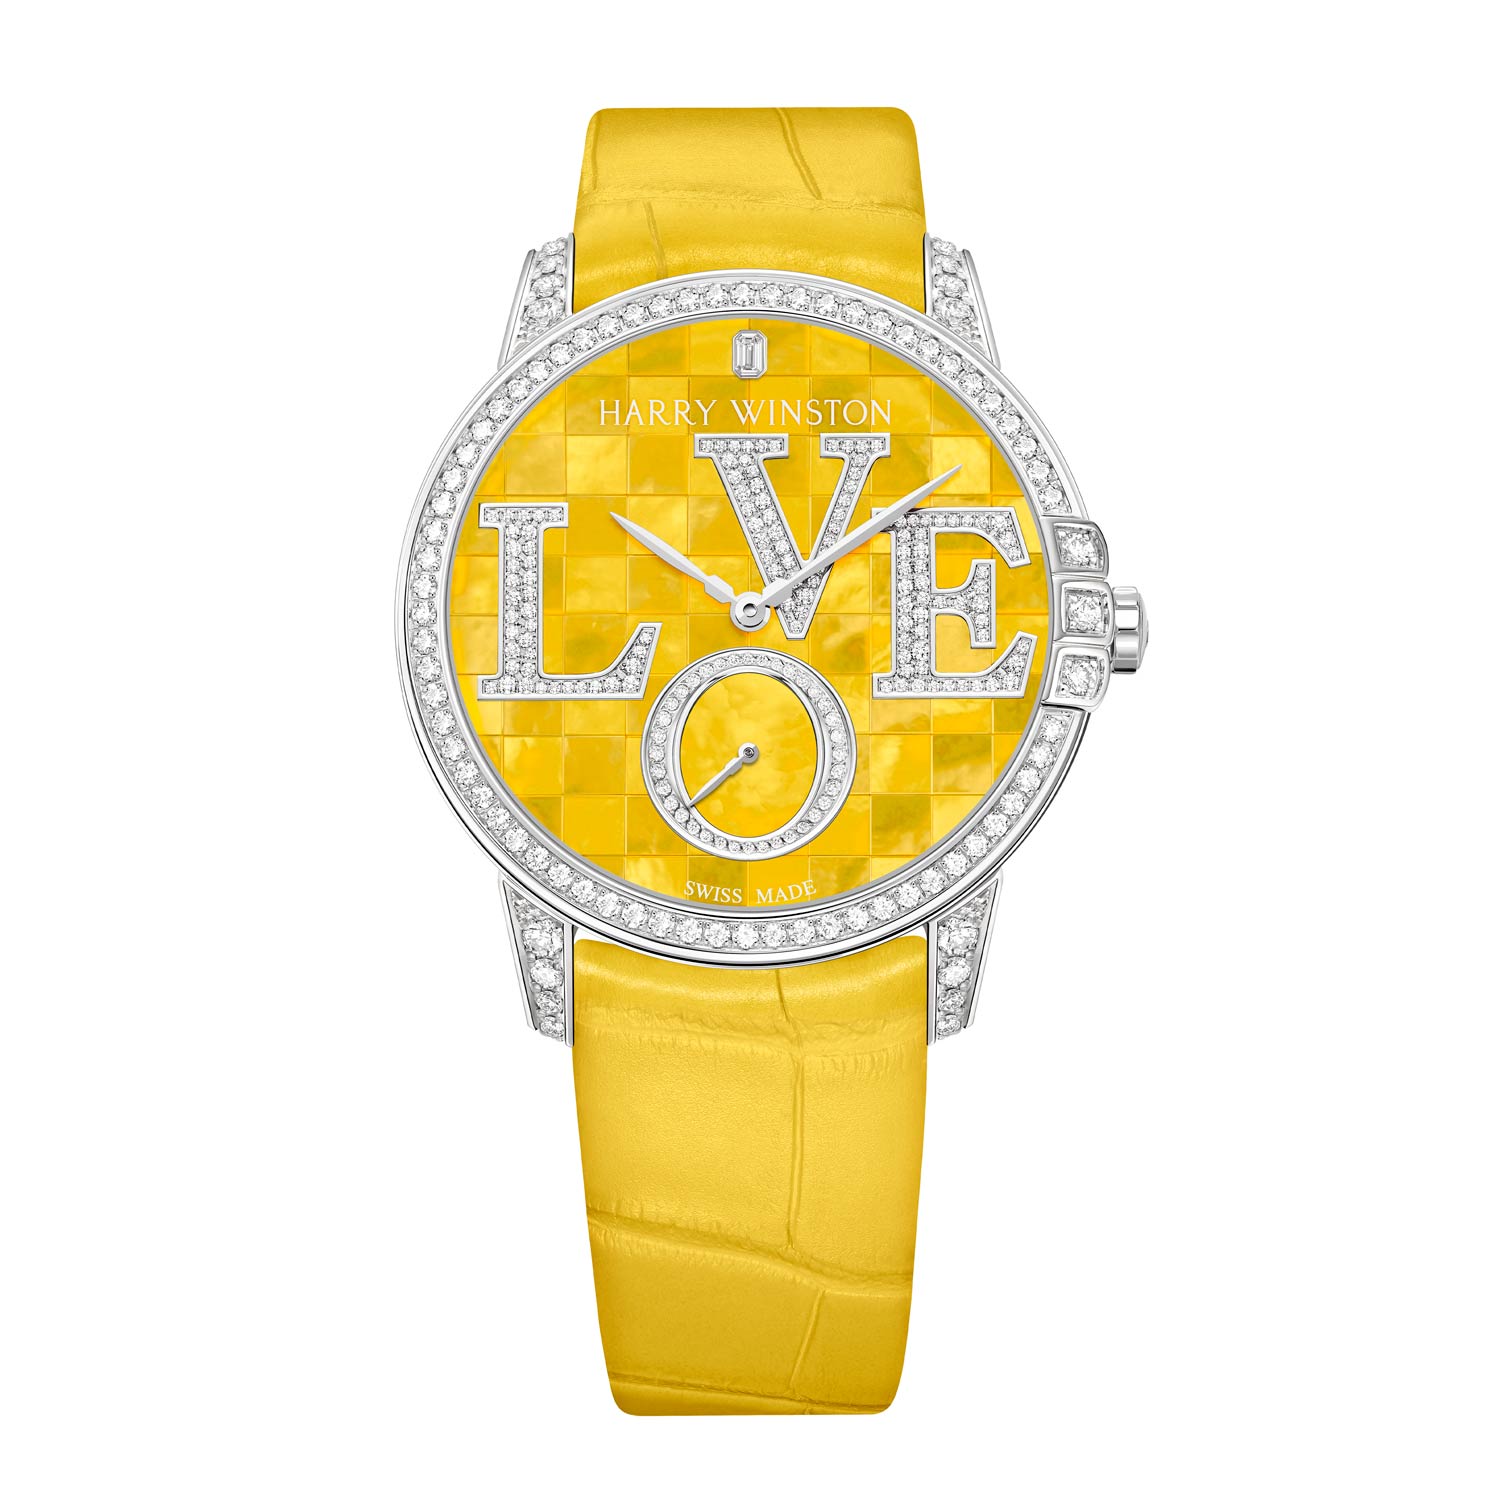 The ‘Winston Light’ timepiece has a bold yellow face and strap to match